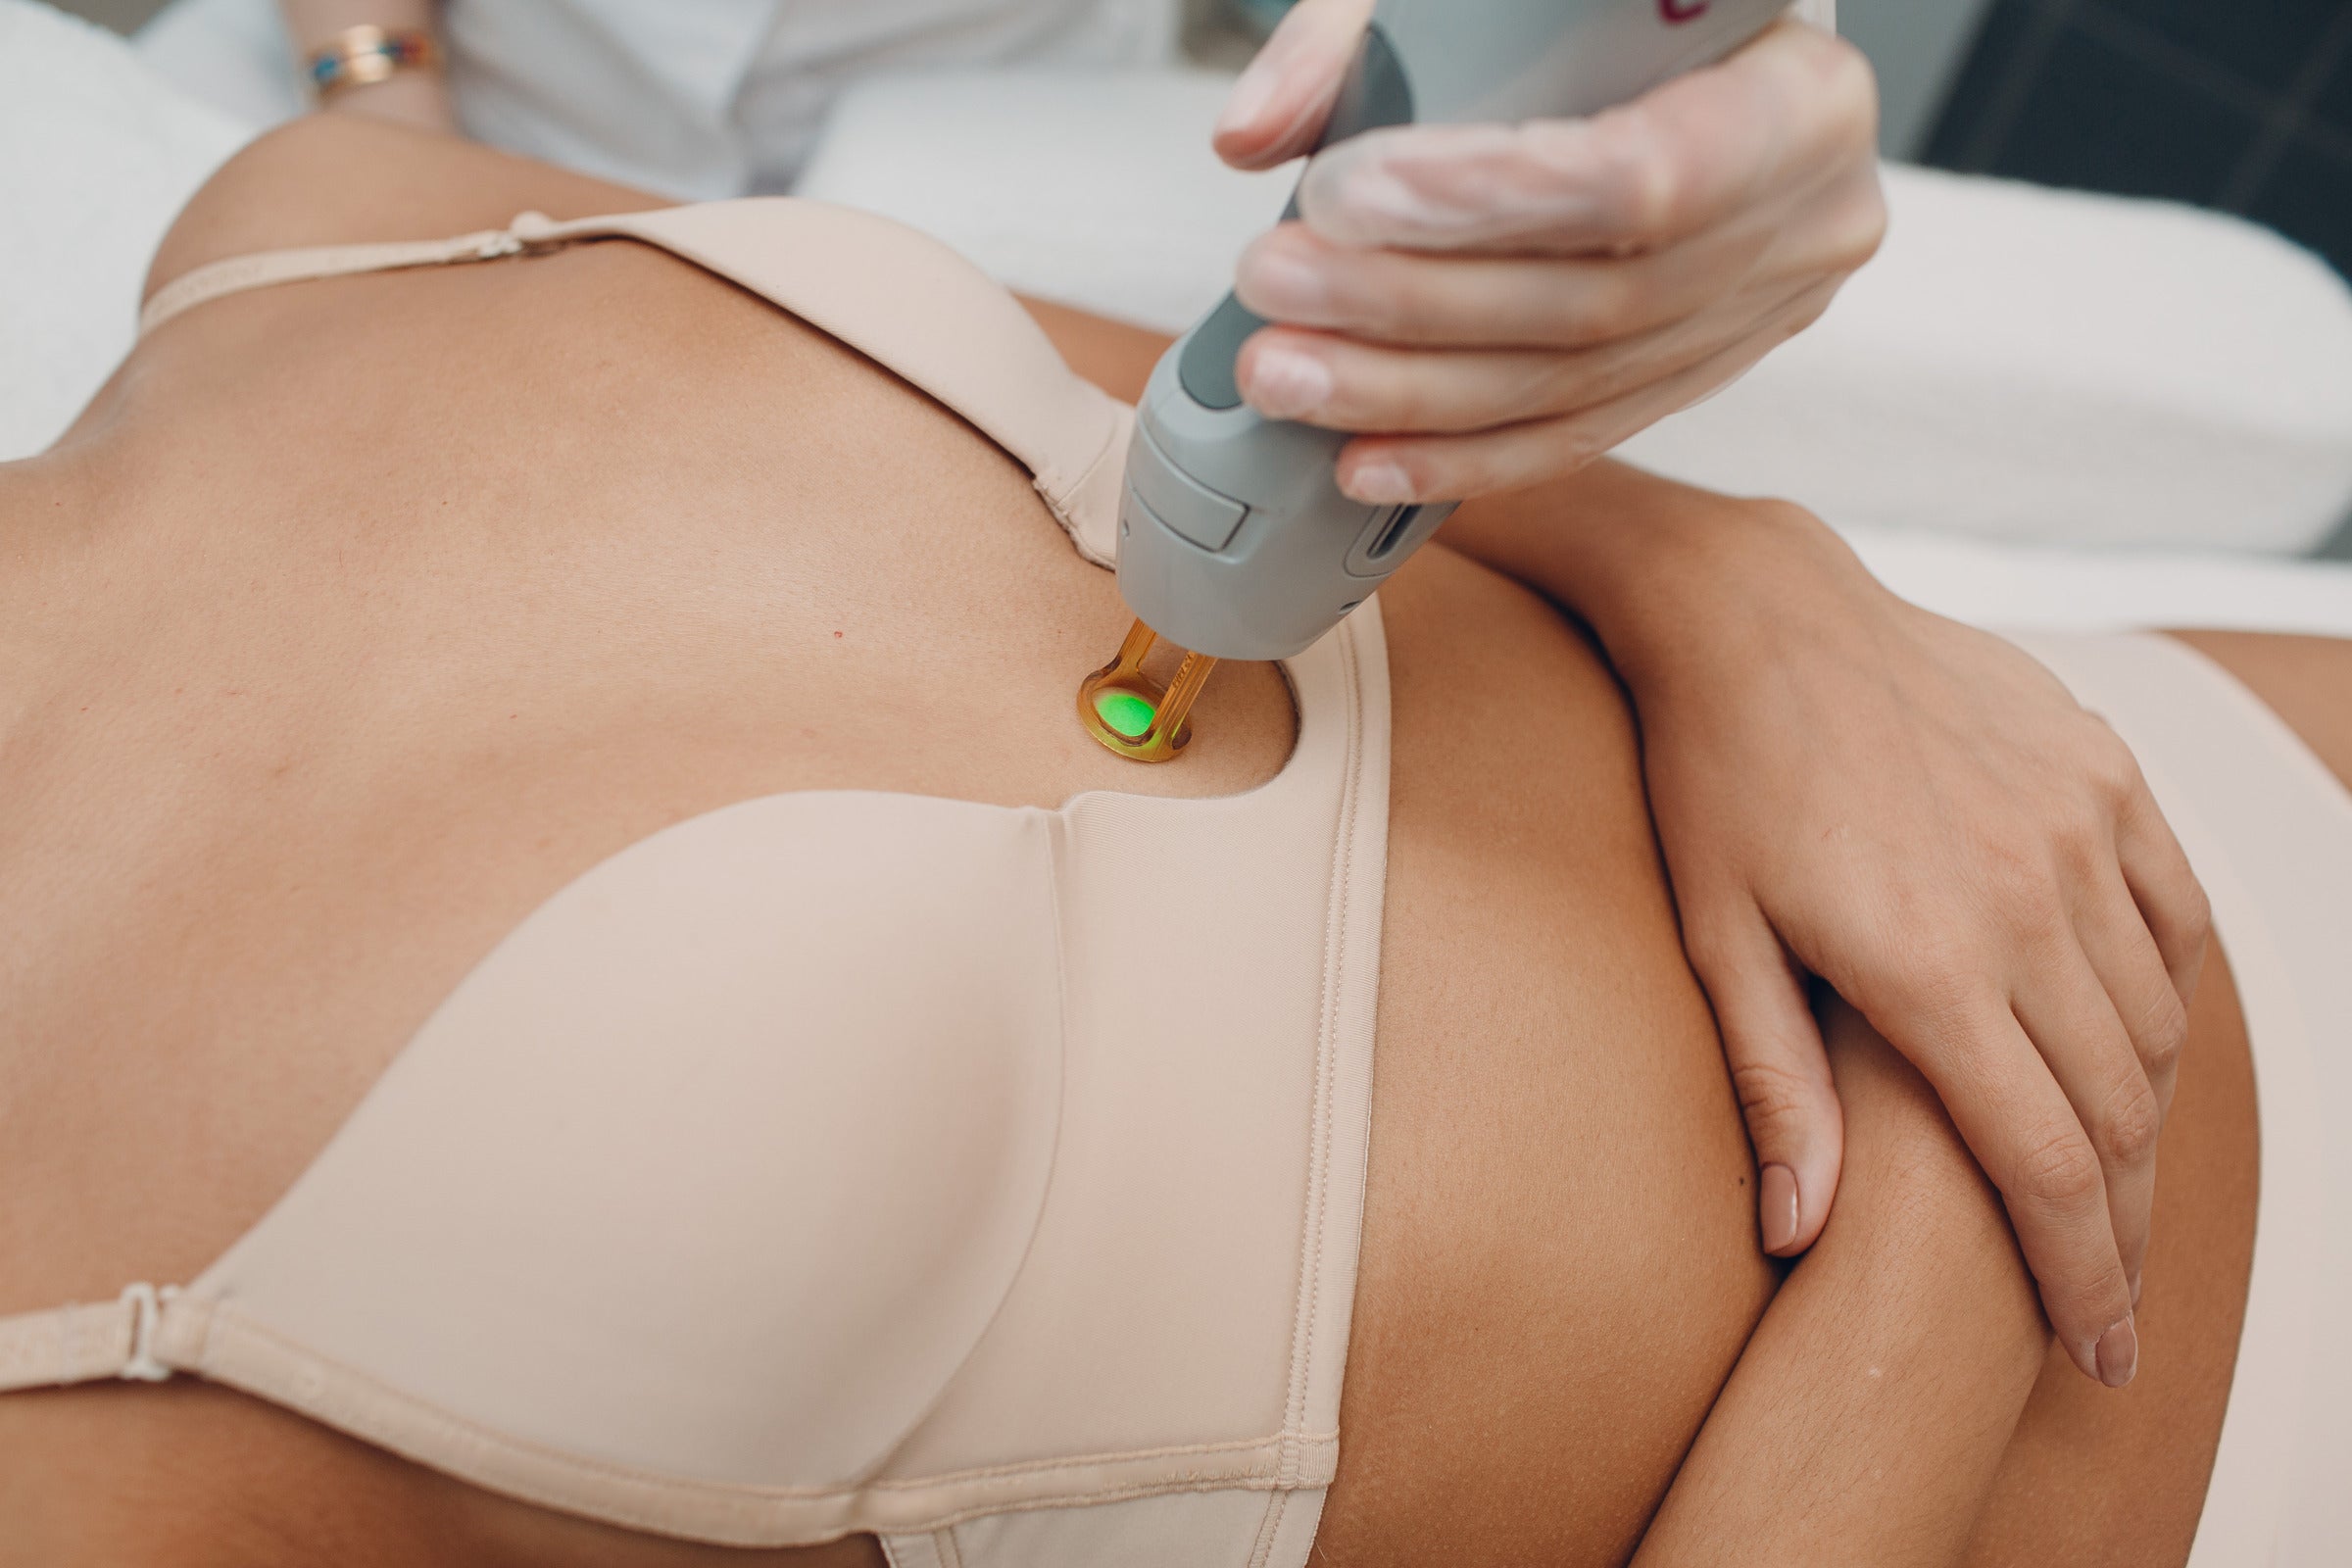 The potential impact of laser hair removal on breast cancer